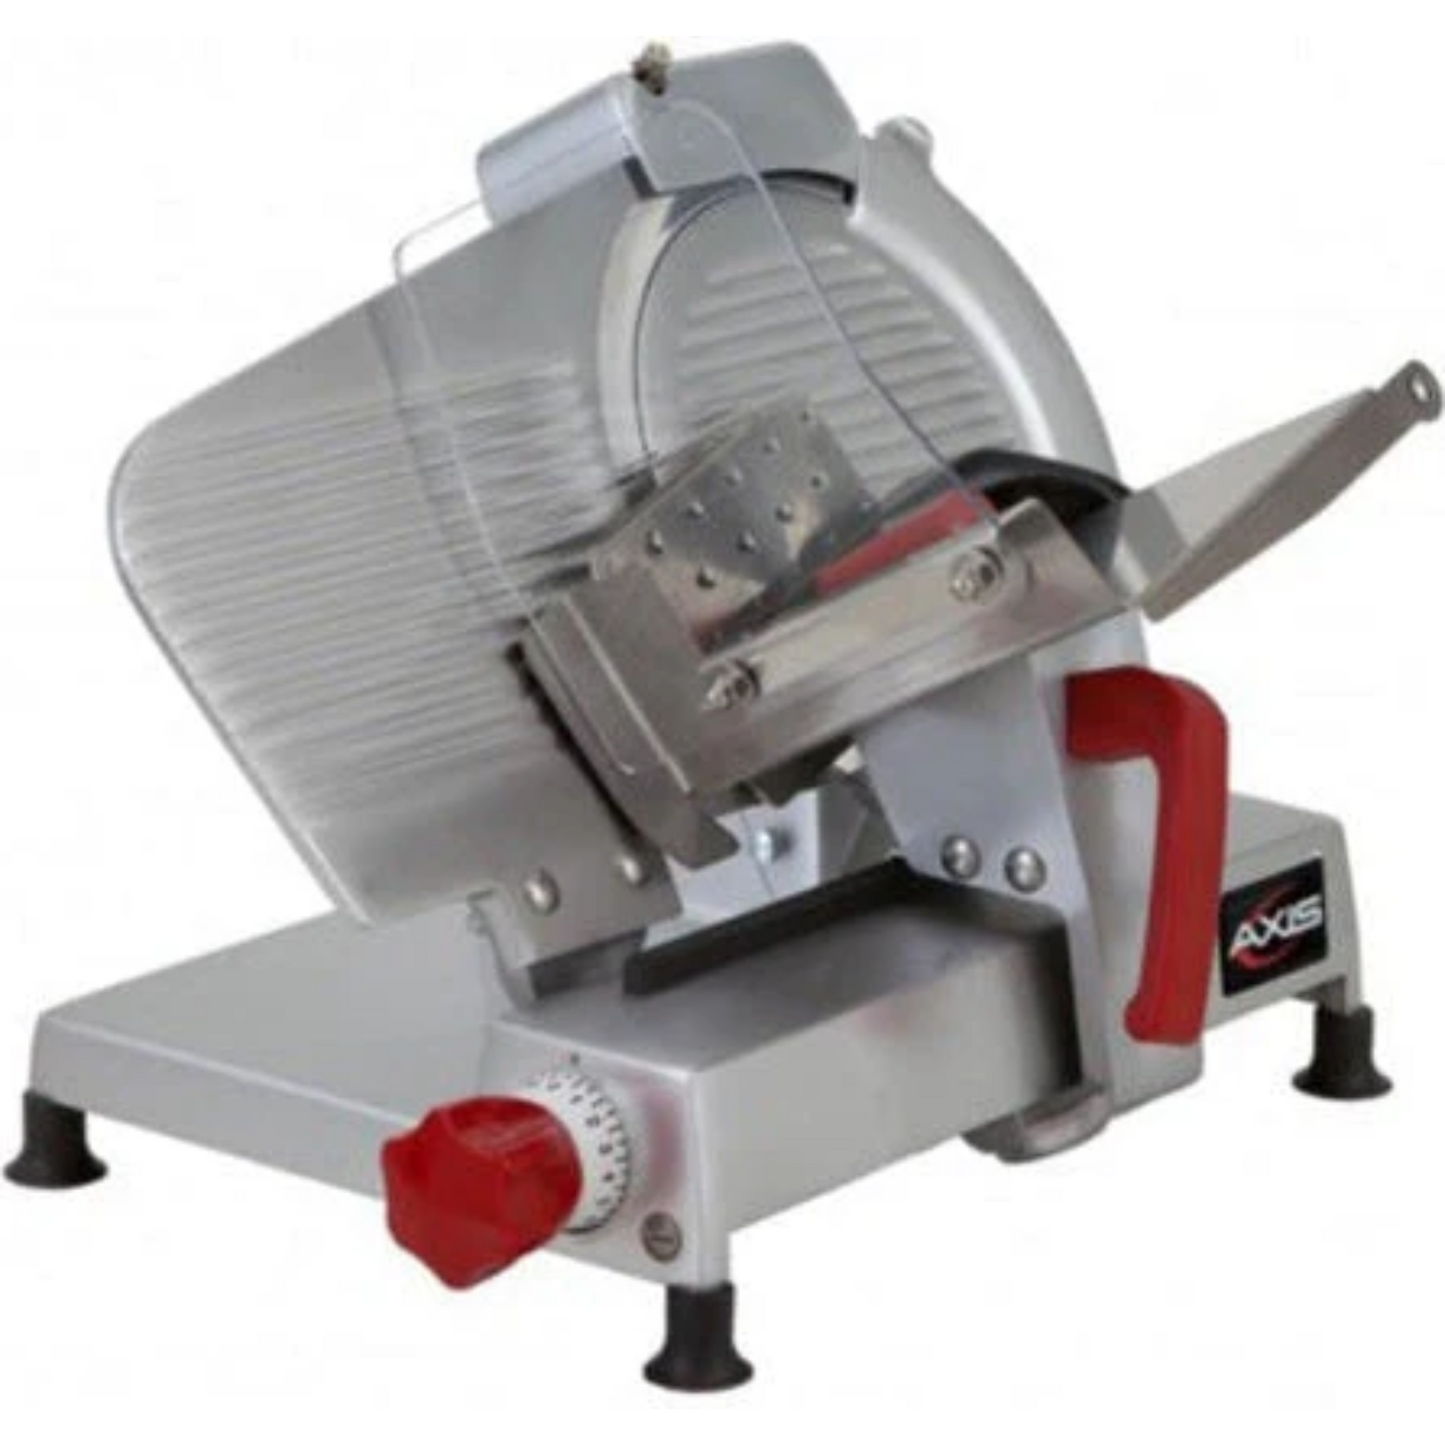 Axis AX-S10 ULTRA Manual Commercial Meat Slicer with 10" Blade, Belt Driven 1/3 HP